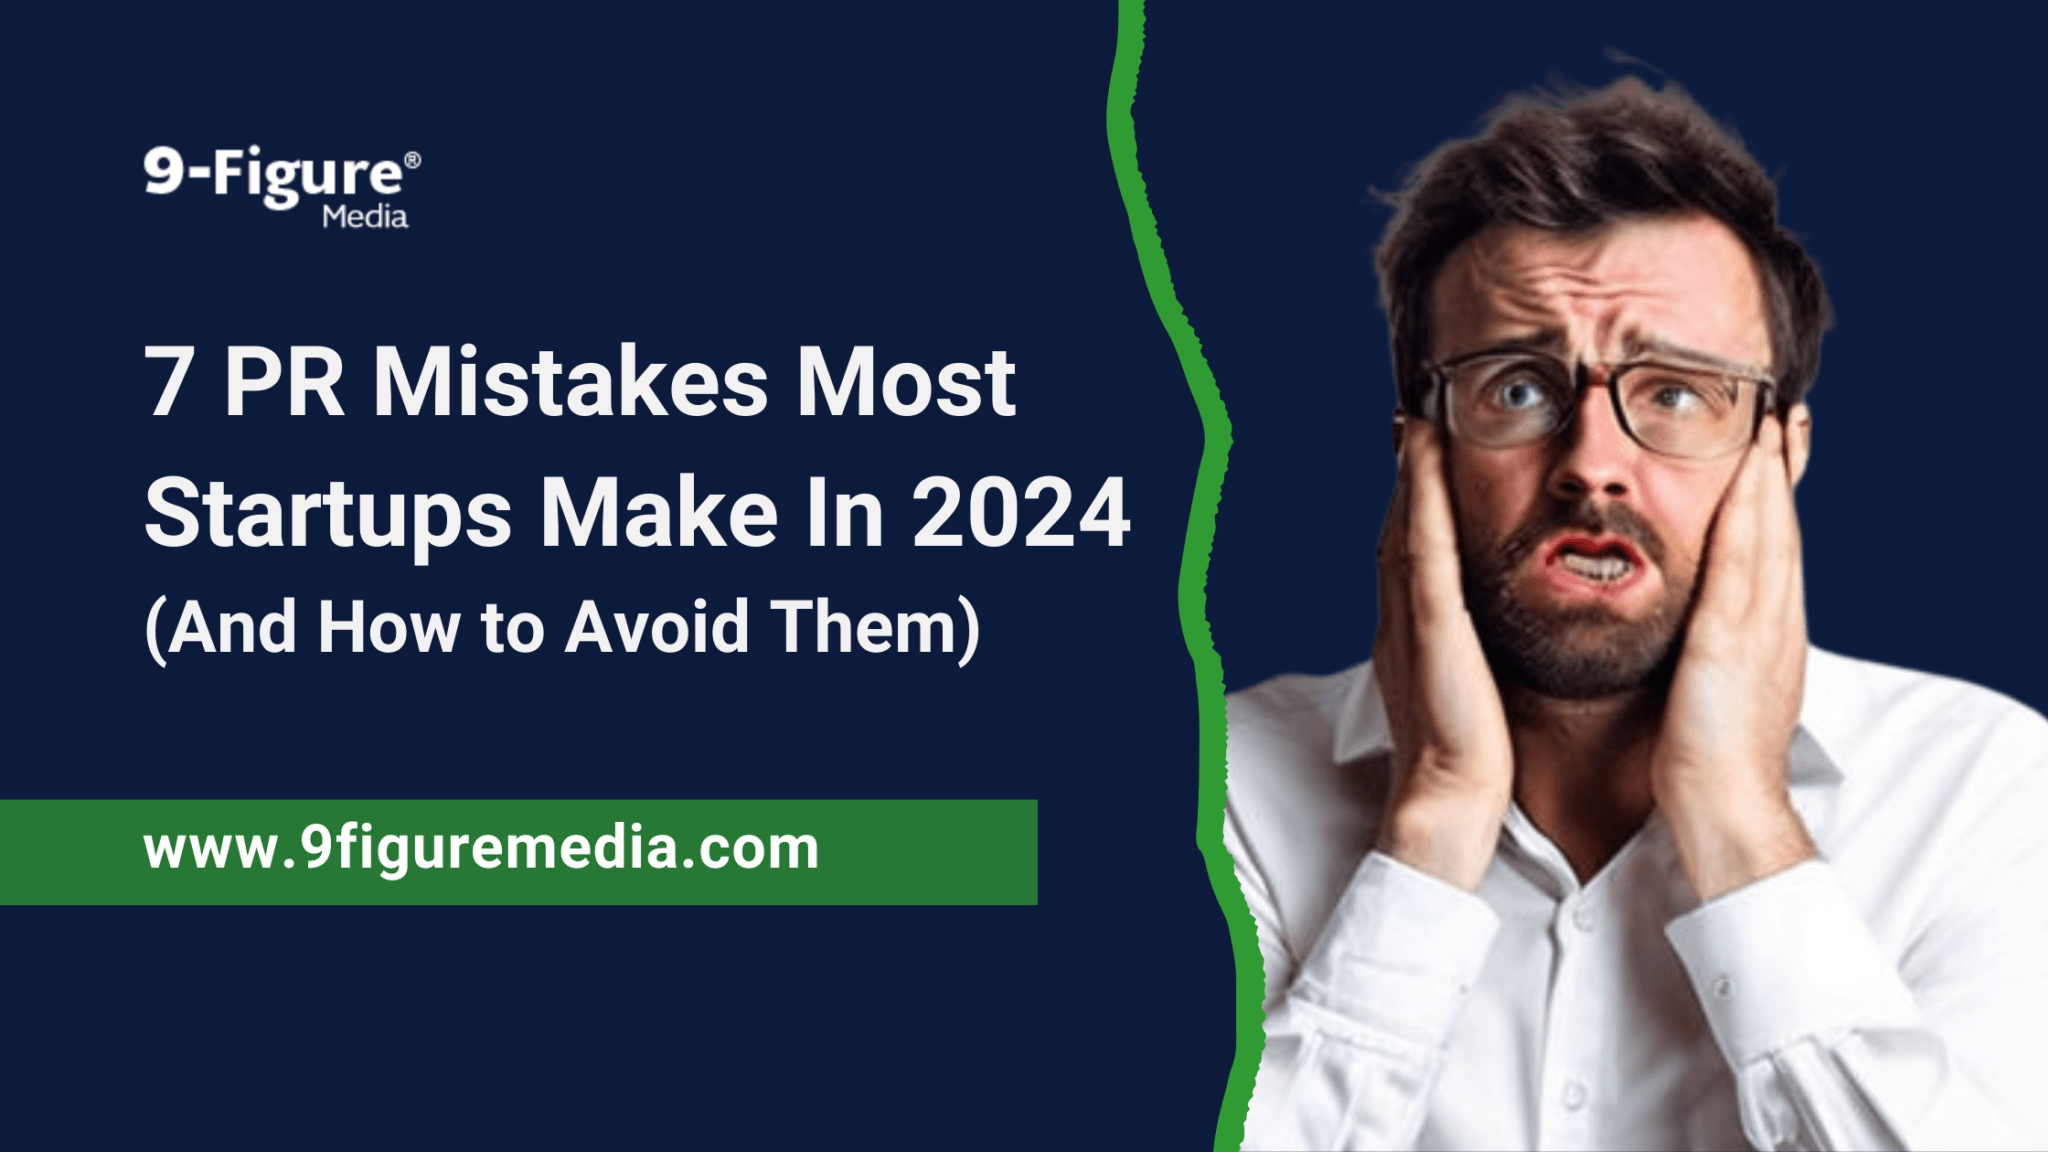 7 Public Relations Mistakes Most Startups Make (and How to Avoid Them with 9Figure Media's Help)